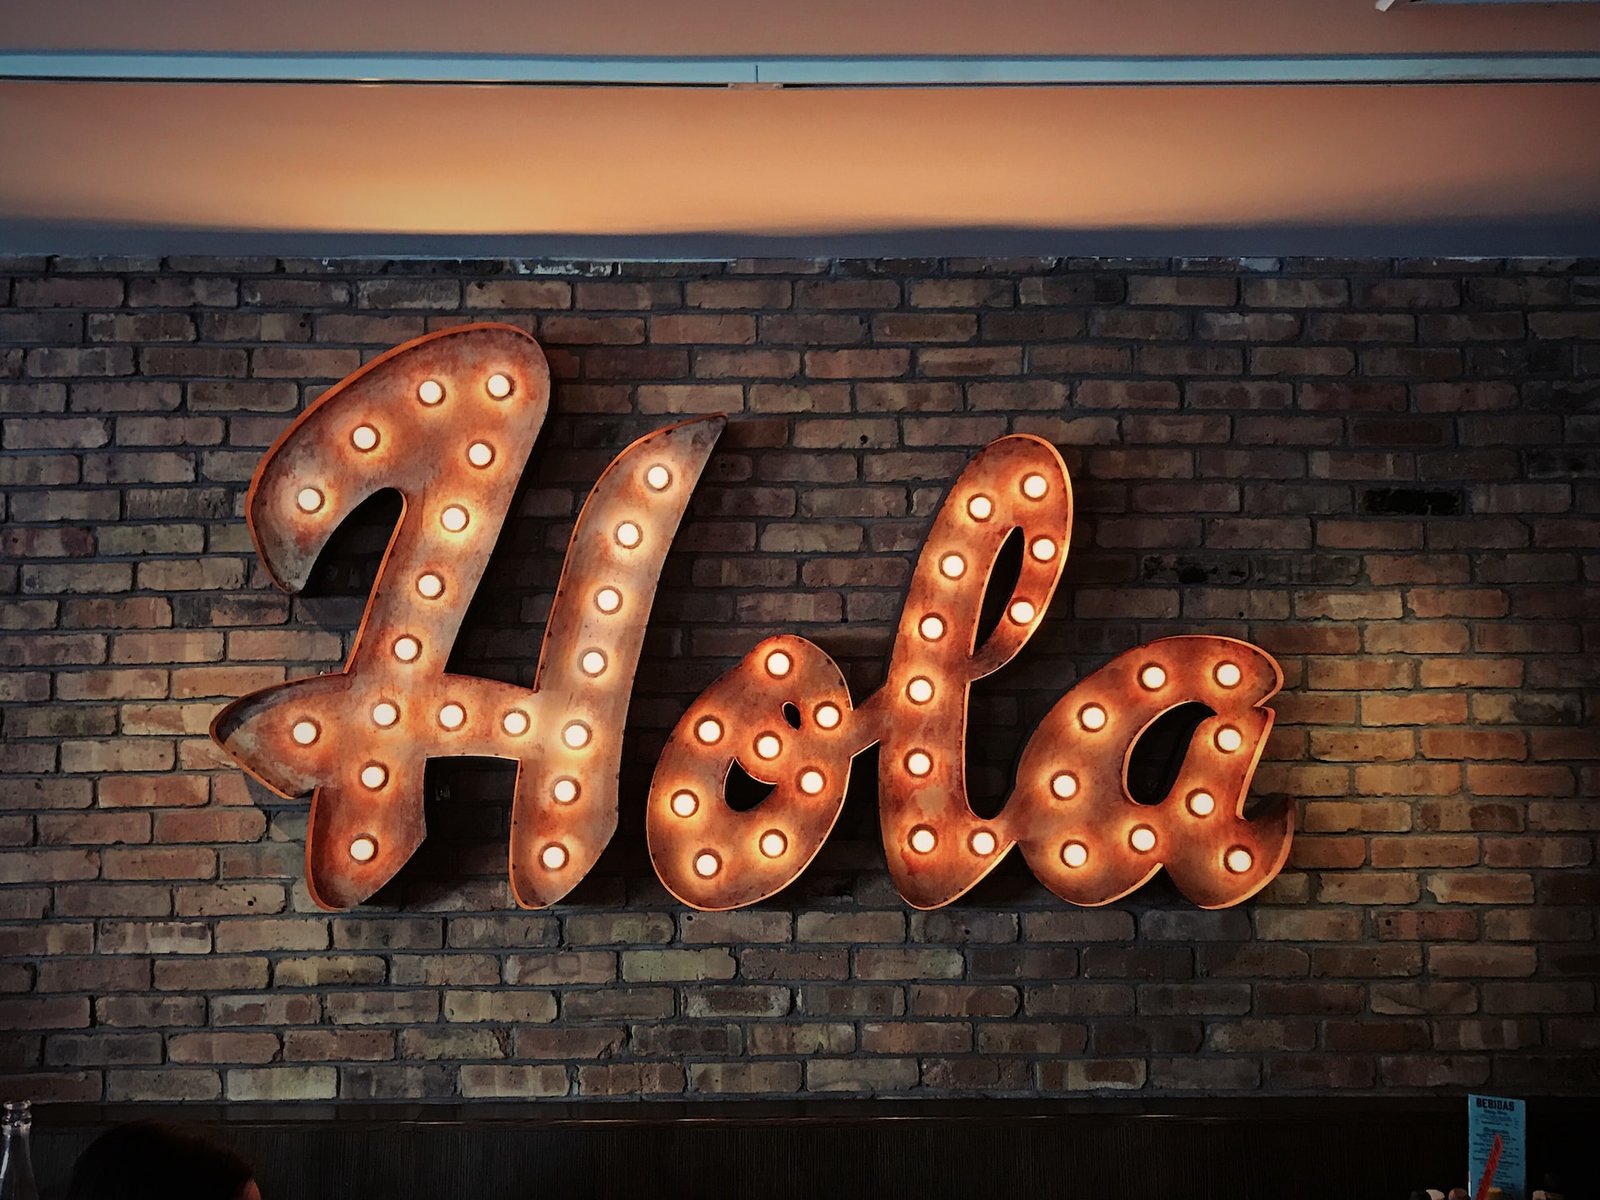 alt="A sign that spells out the word "Hola", part of Education in Spanish"